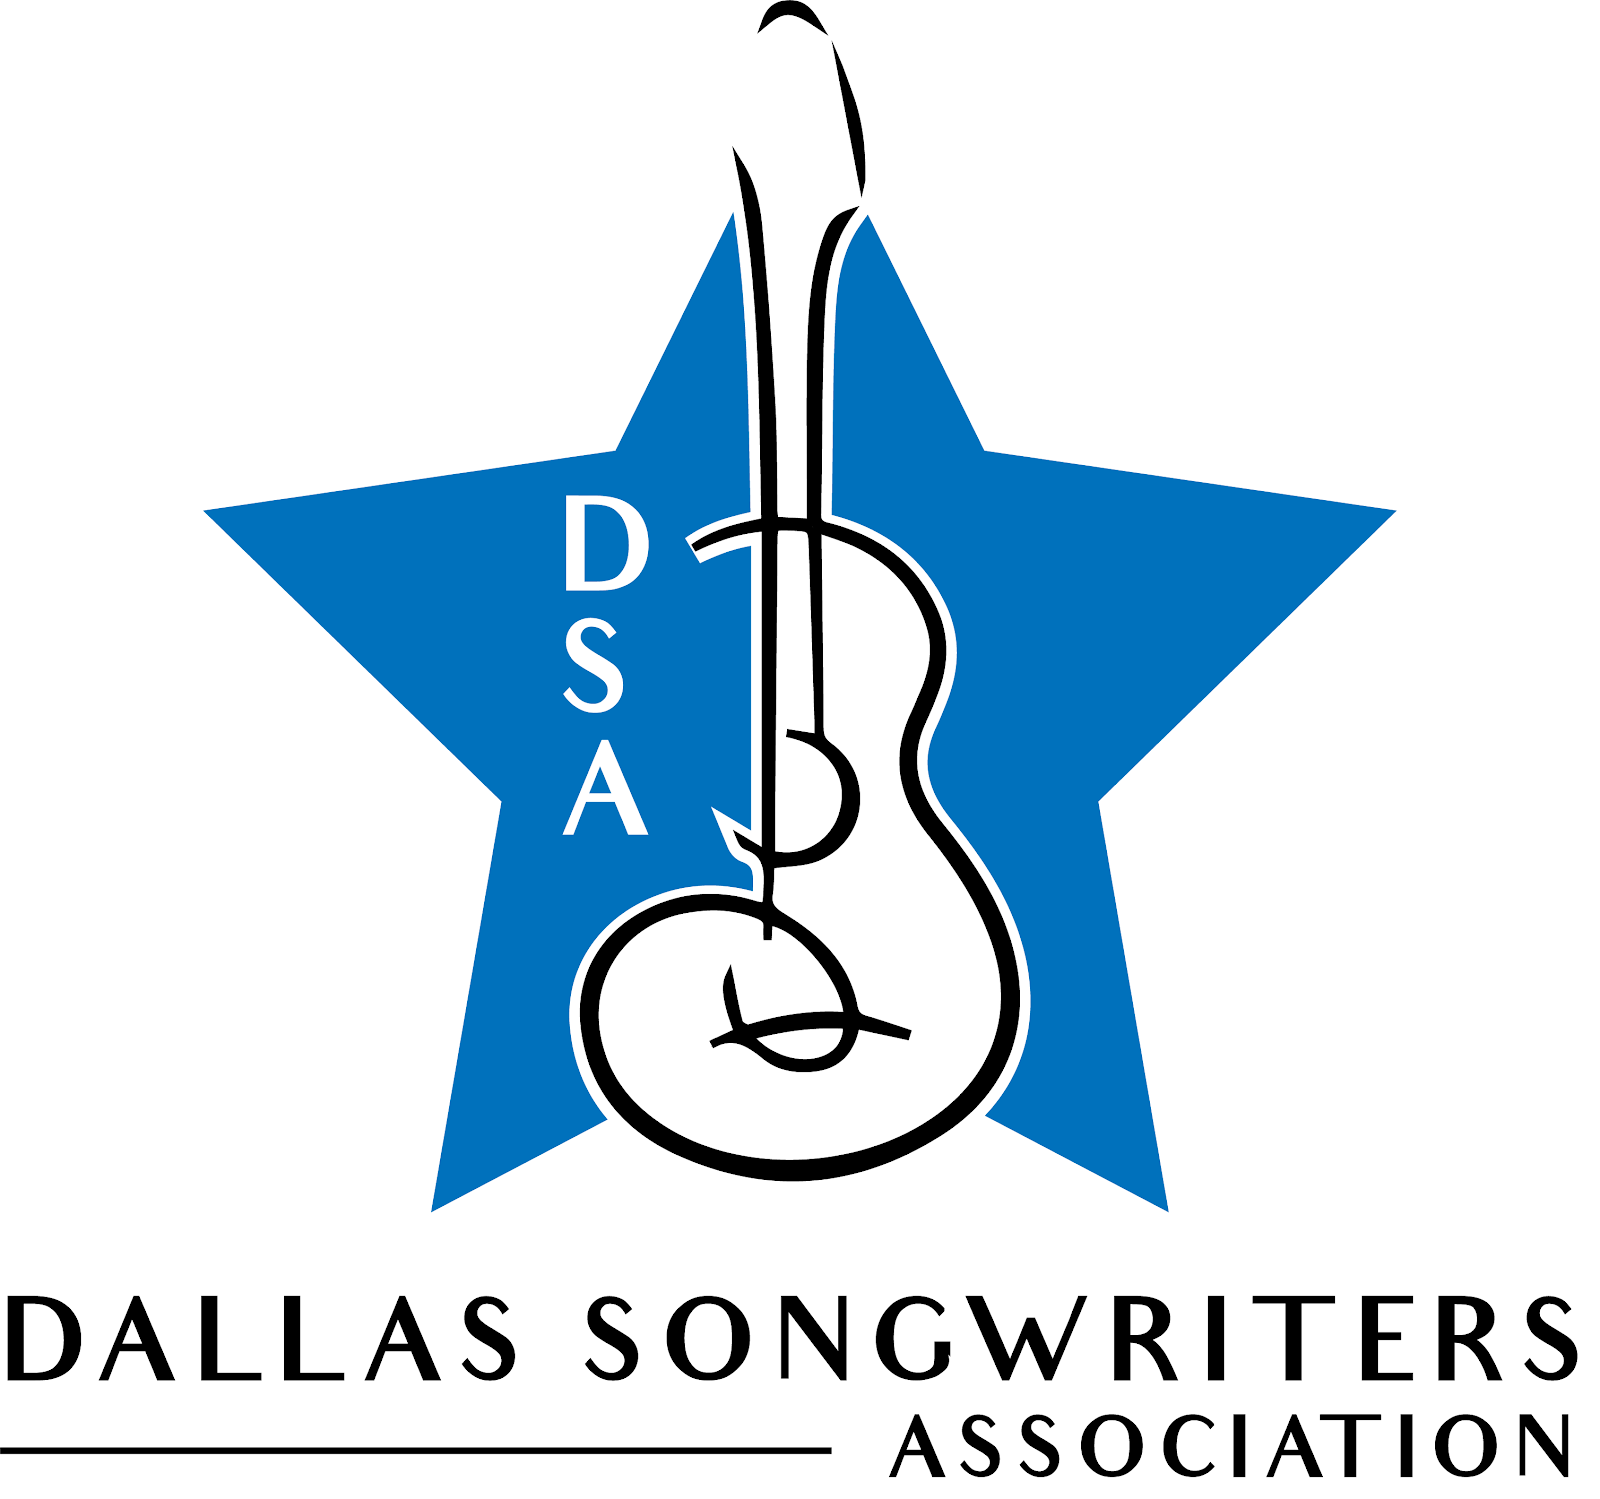 Published by the Dallas Songwriters Association